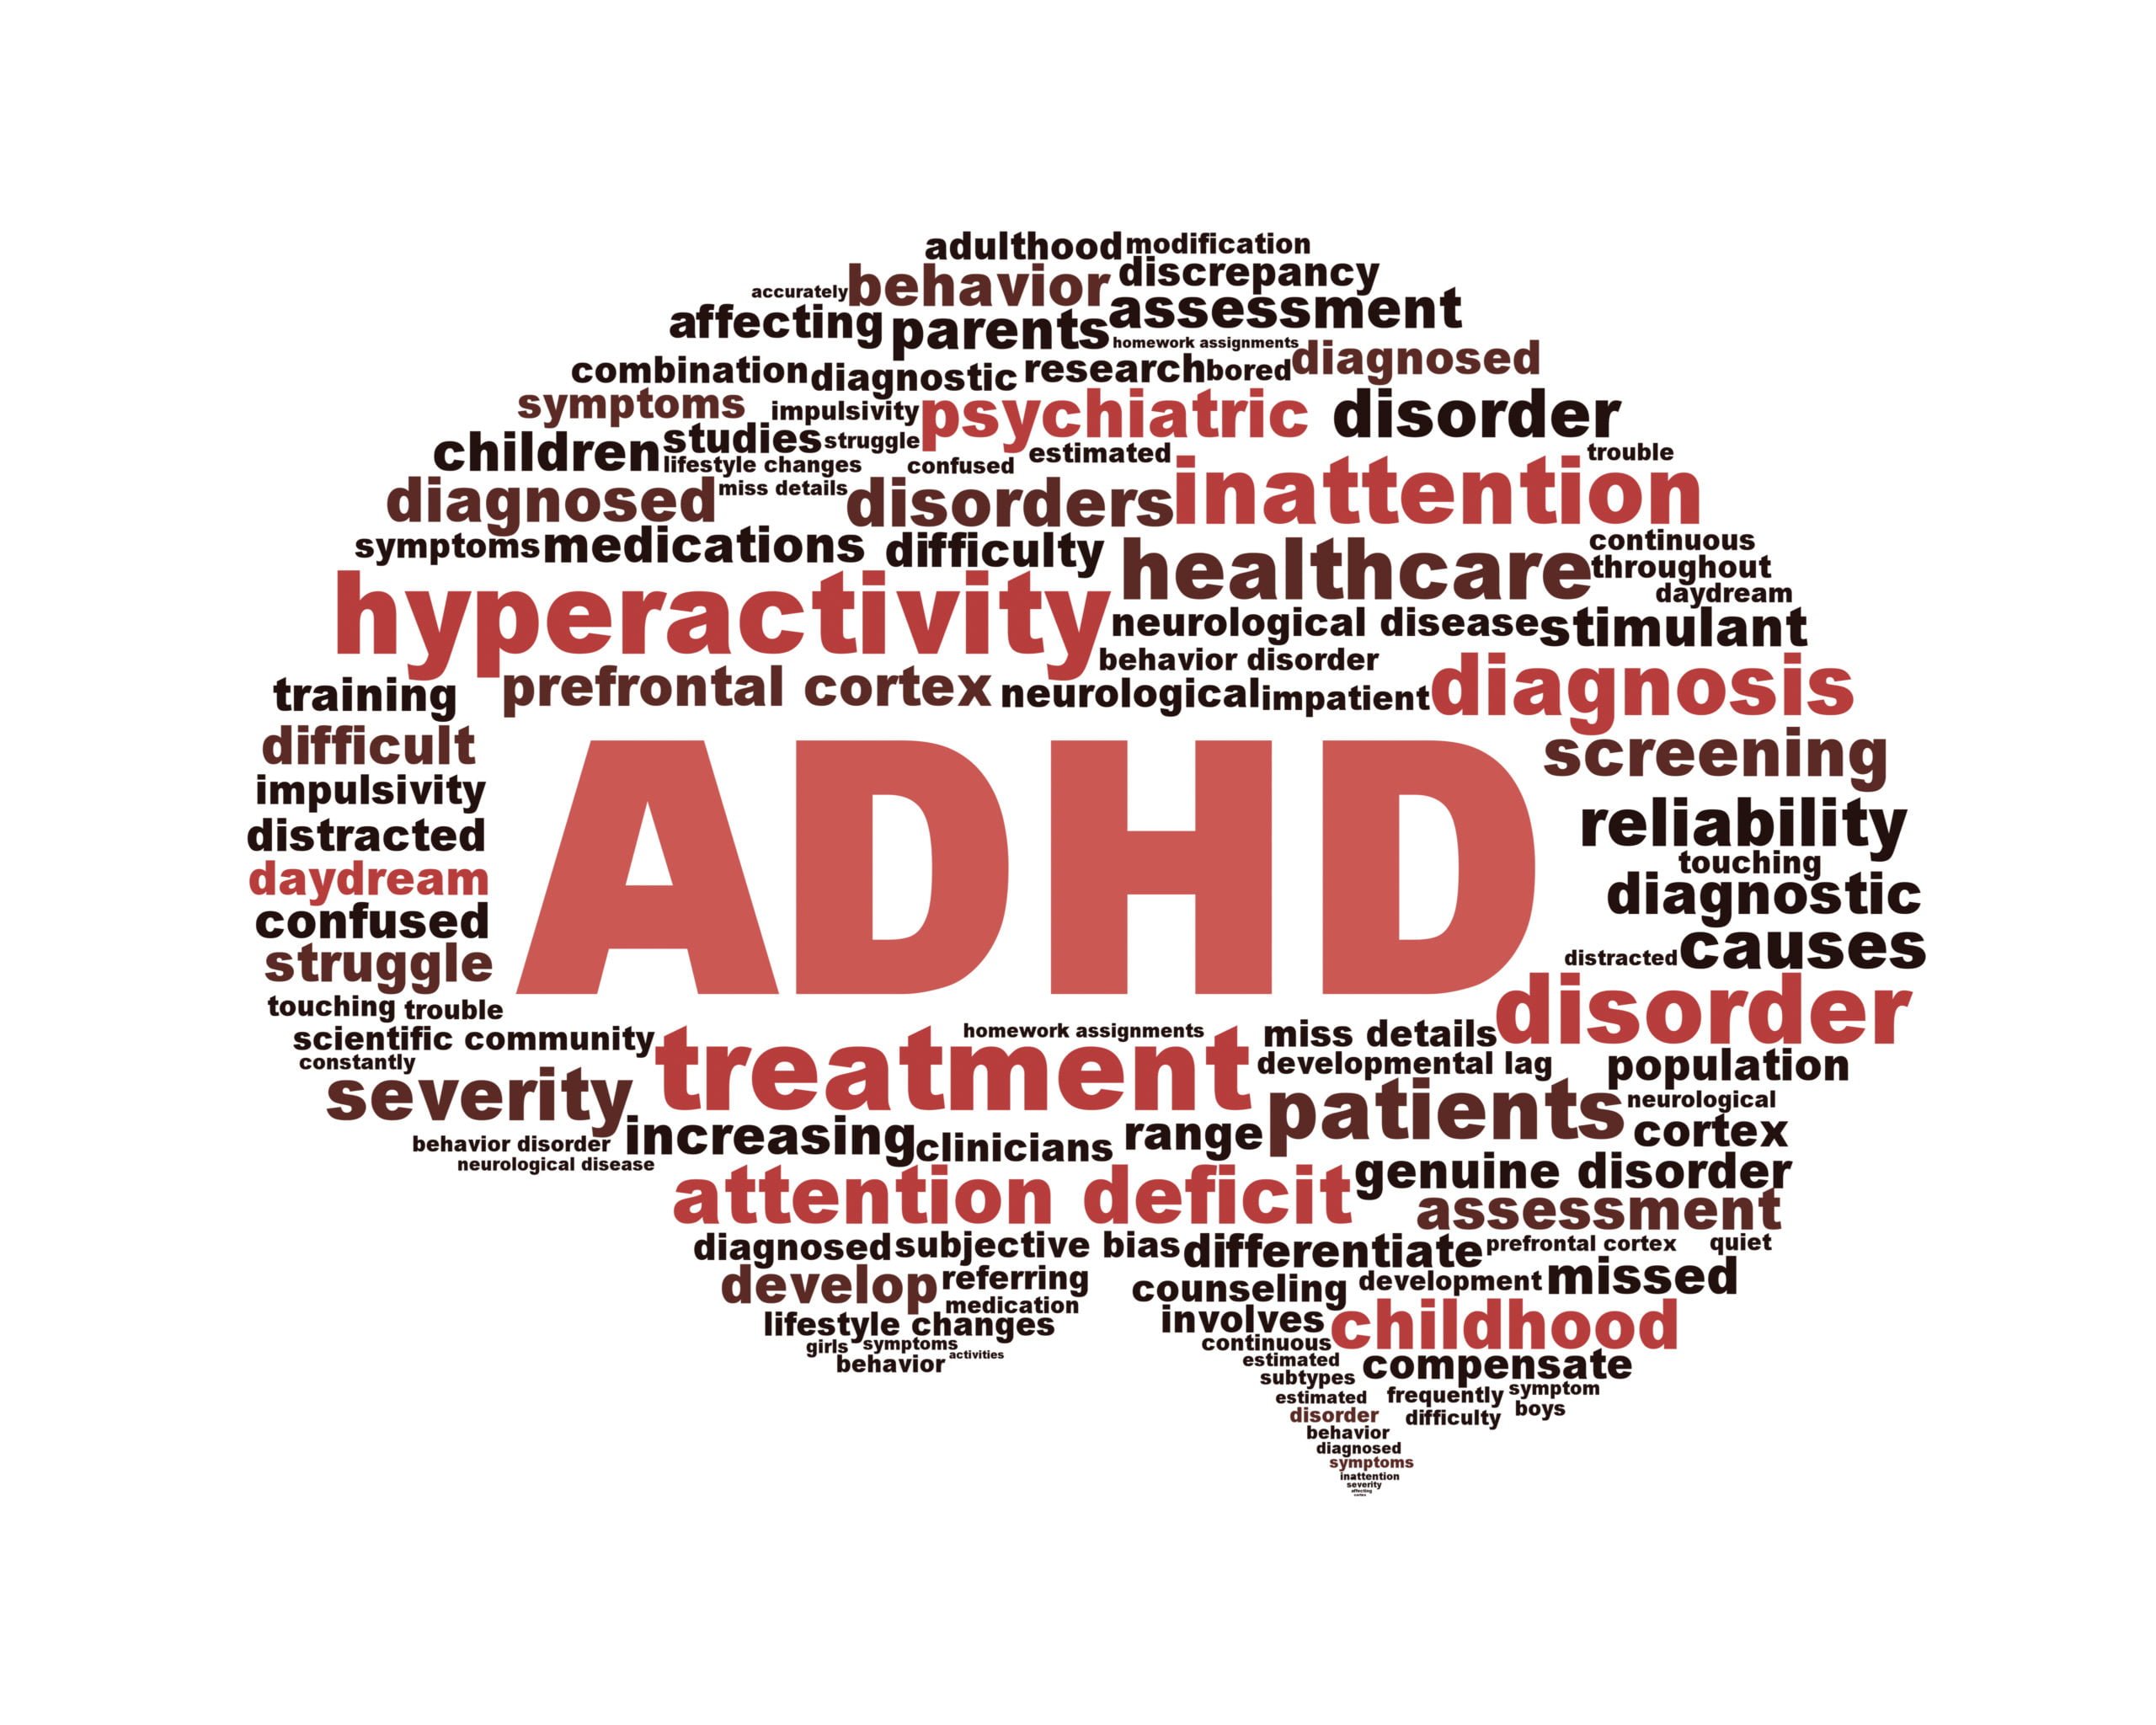 To NEBA or Not to NEBA? That is the ADHD Question.